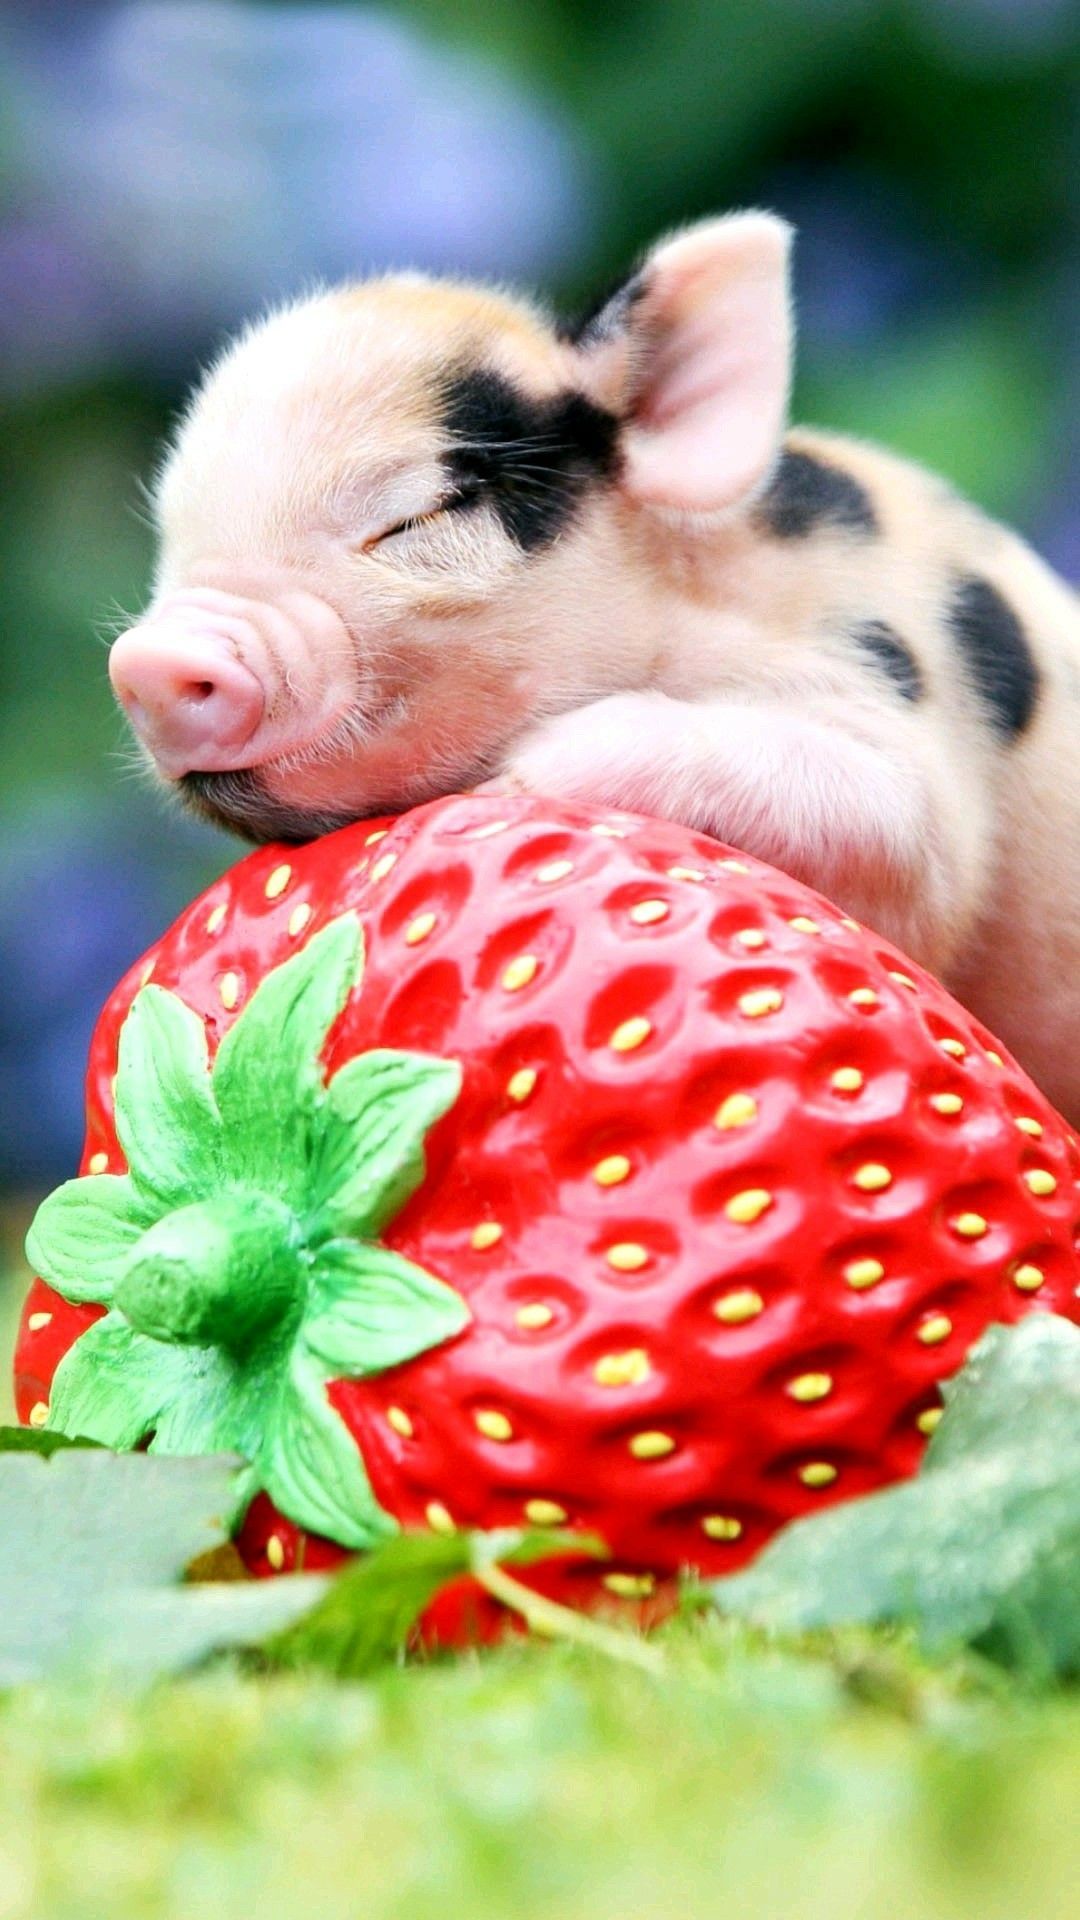 Baby pig on a strawberry wallpaper. Cute baby pigs, Teacup pigs, Baby pigs